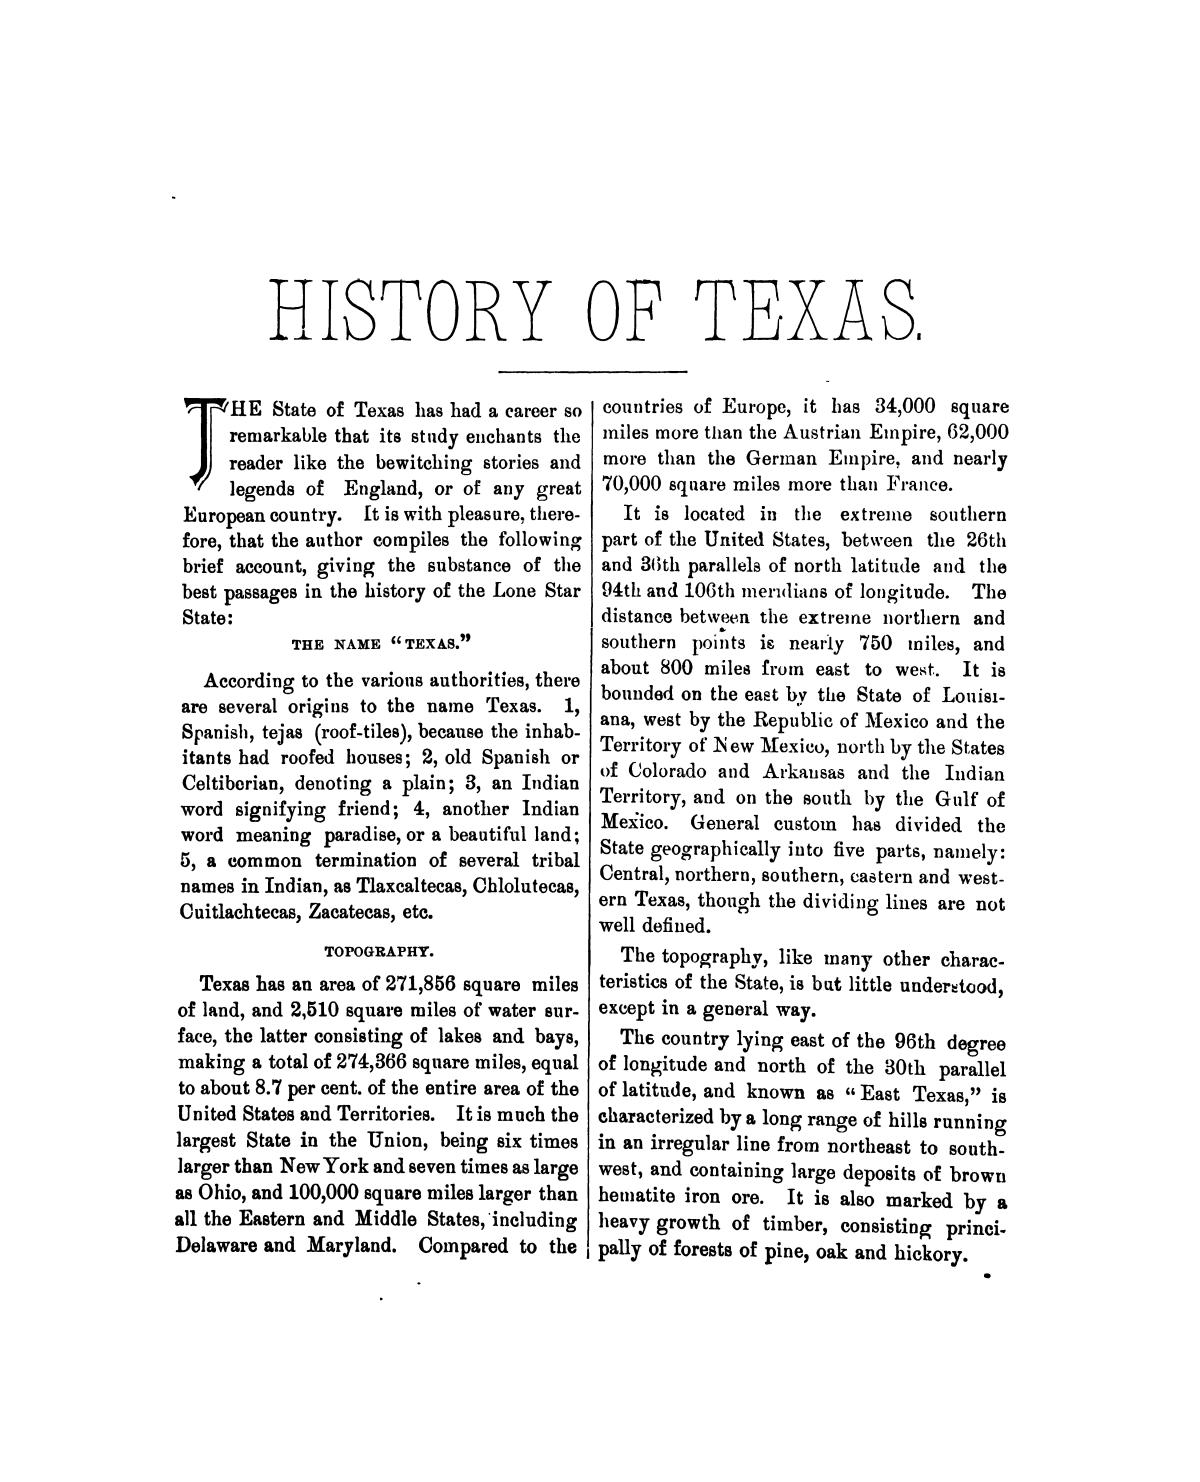 History of Texas, Together with a Biographical History of Milam, Williamson, Bastrop, Travis, Lee and Burleson Counties.
                                                
                                                    9
                                                